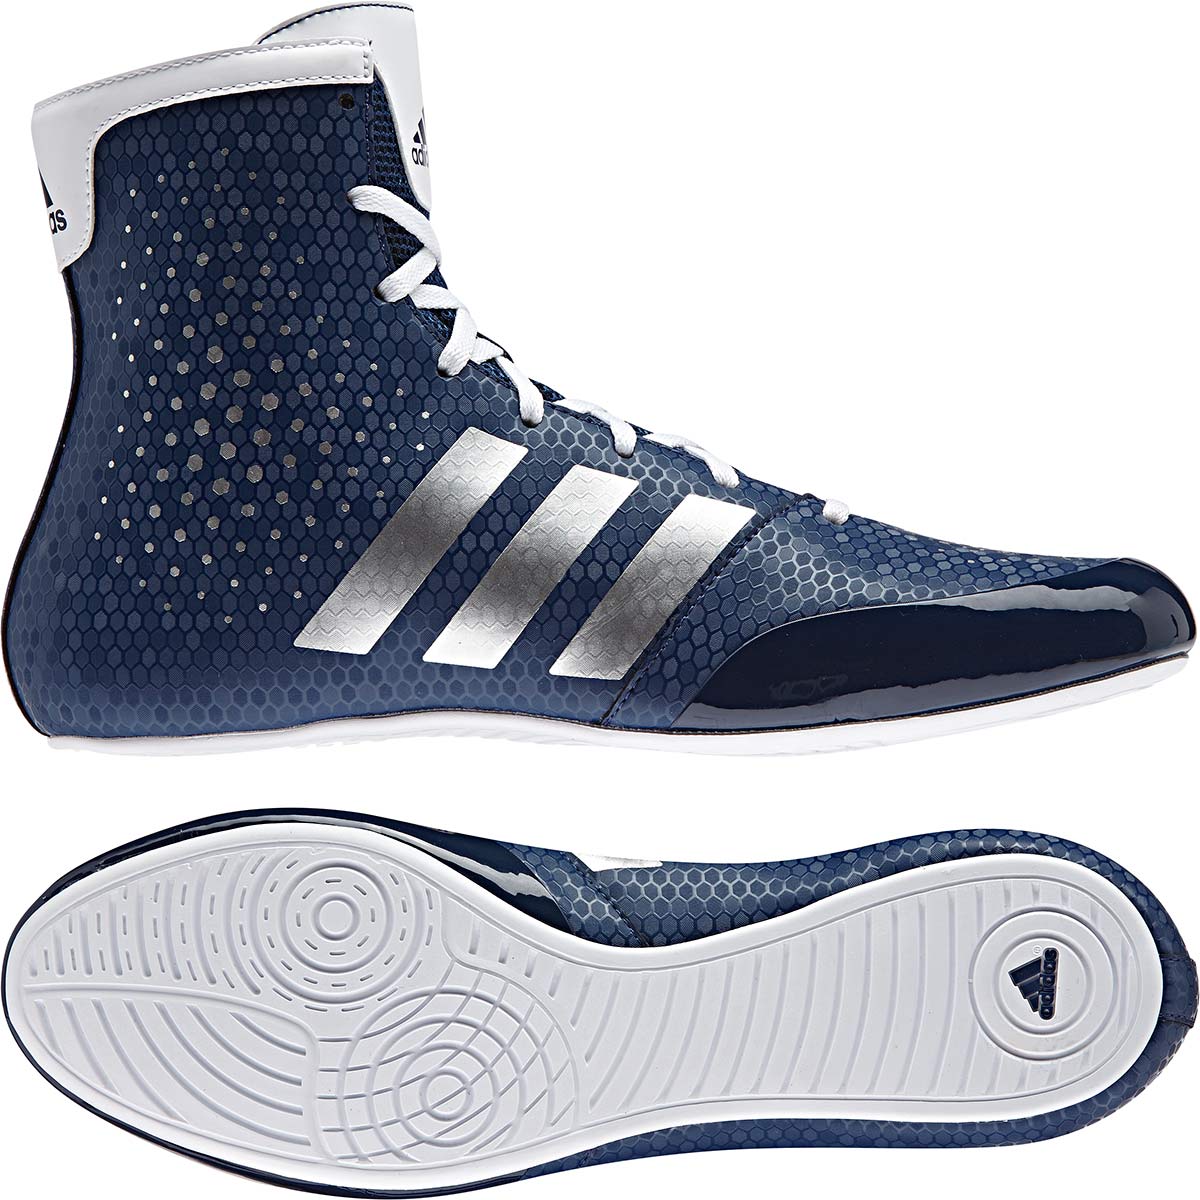 blue adidas boxing boots